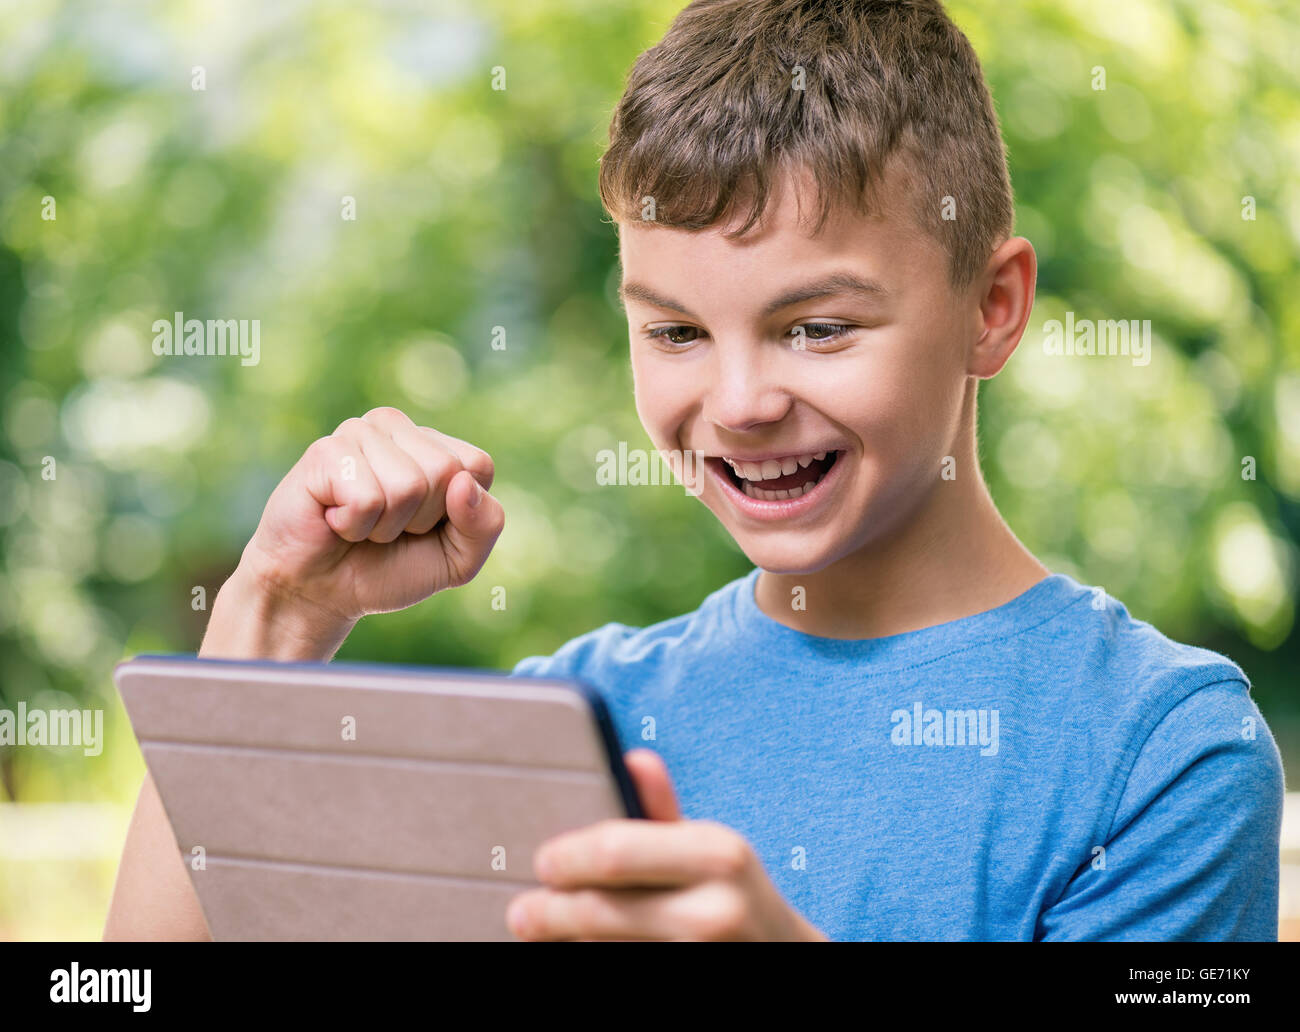 Boy with tablet Stock Photo